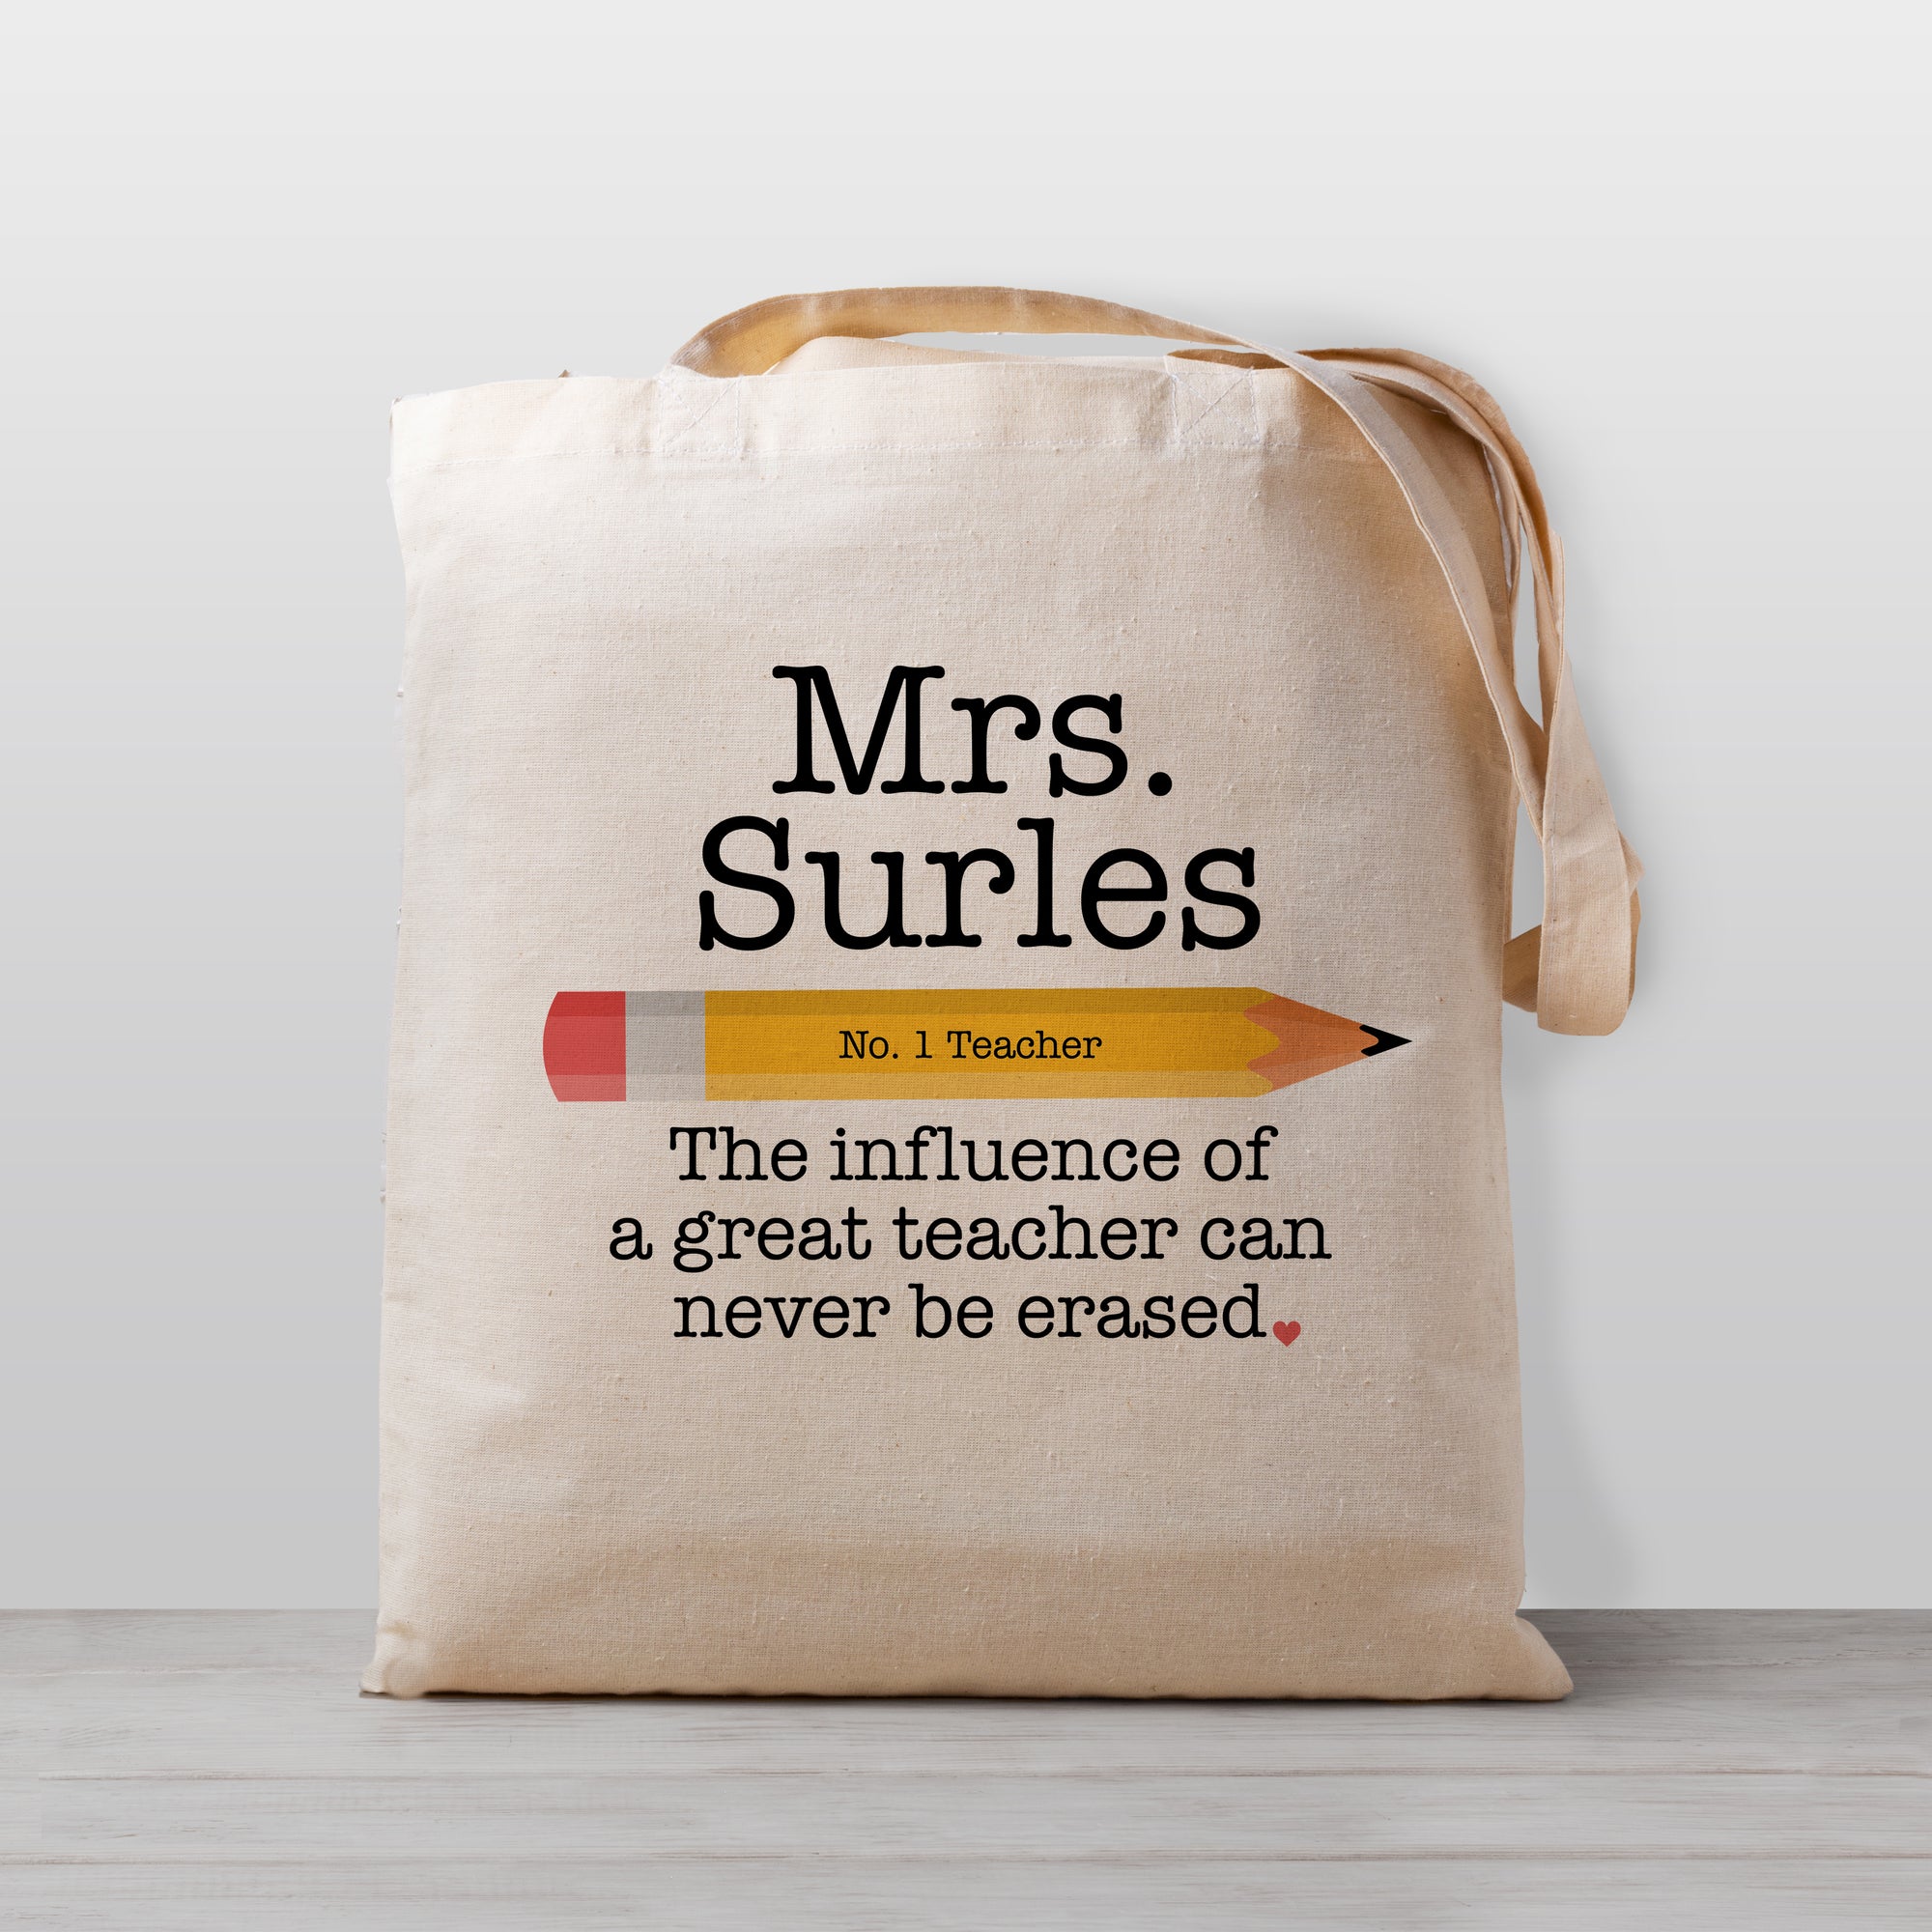 Teacher Gift, Pencil Tote Bag "The Infludence of a great teacher can never be erased", 100% Natural Cotton Canvas